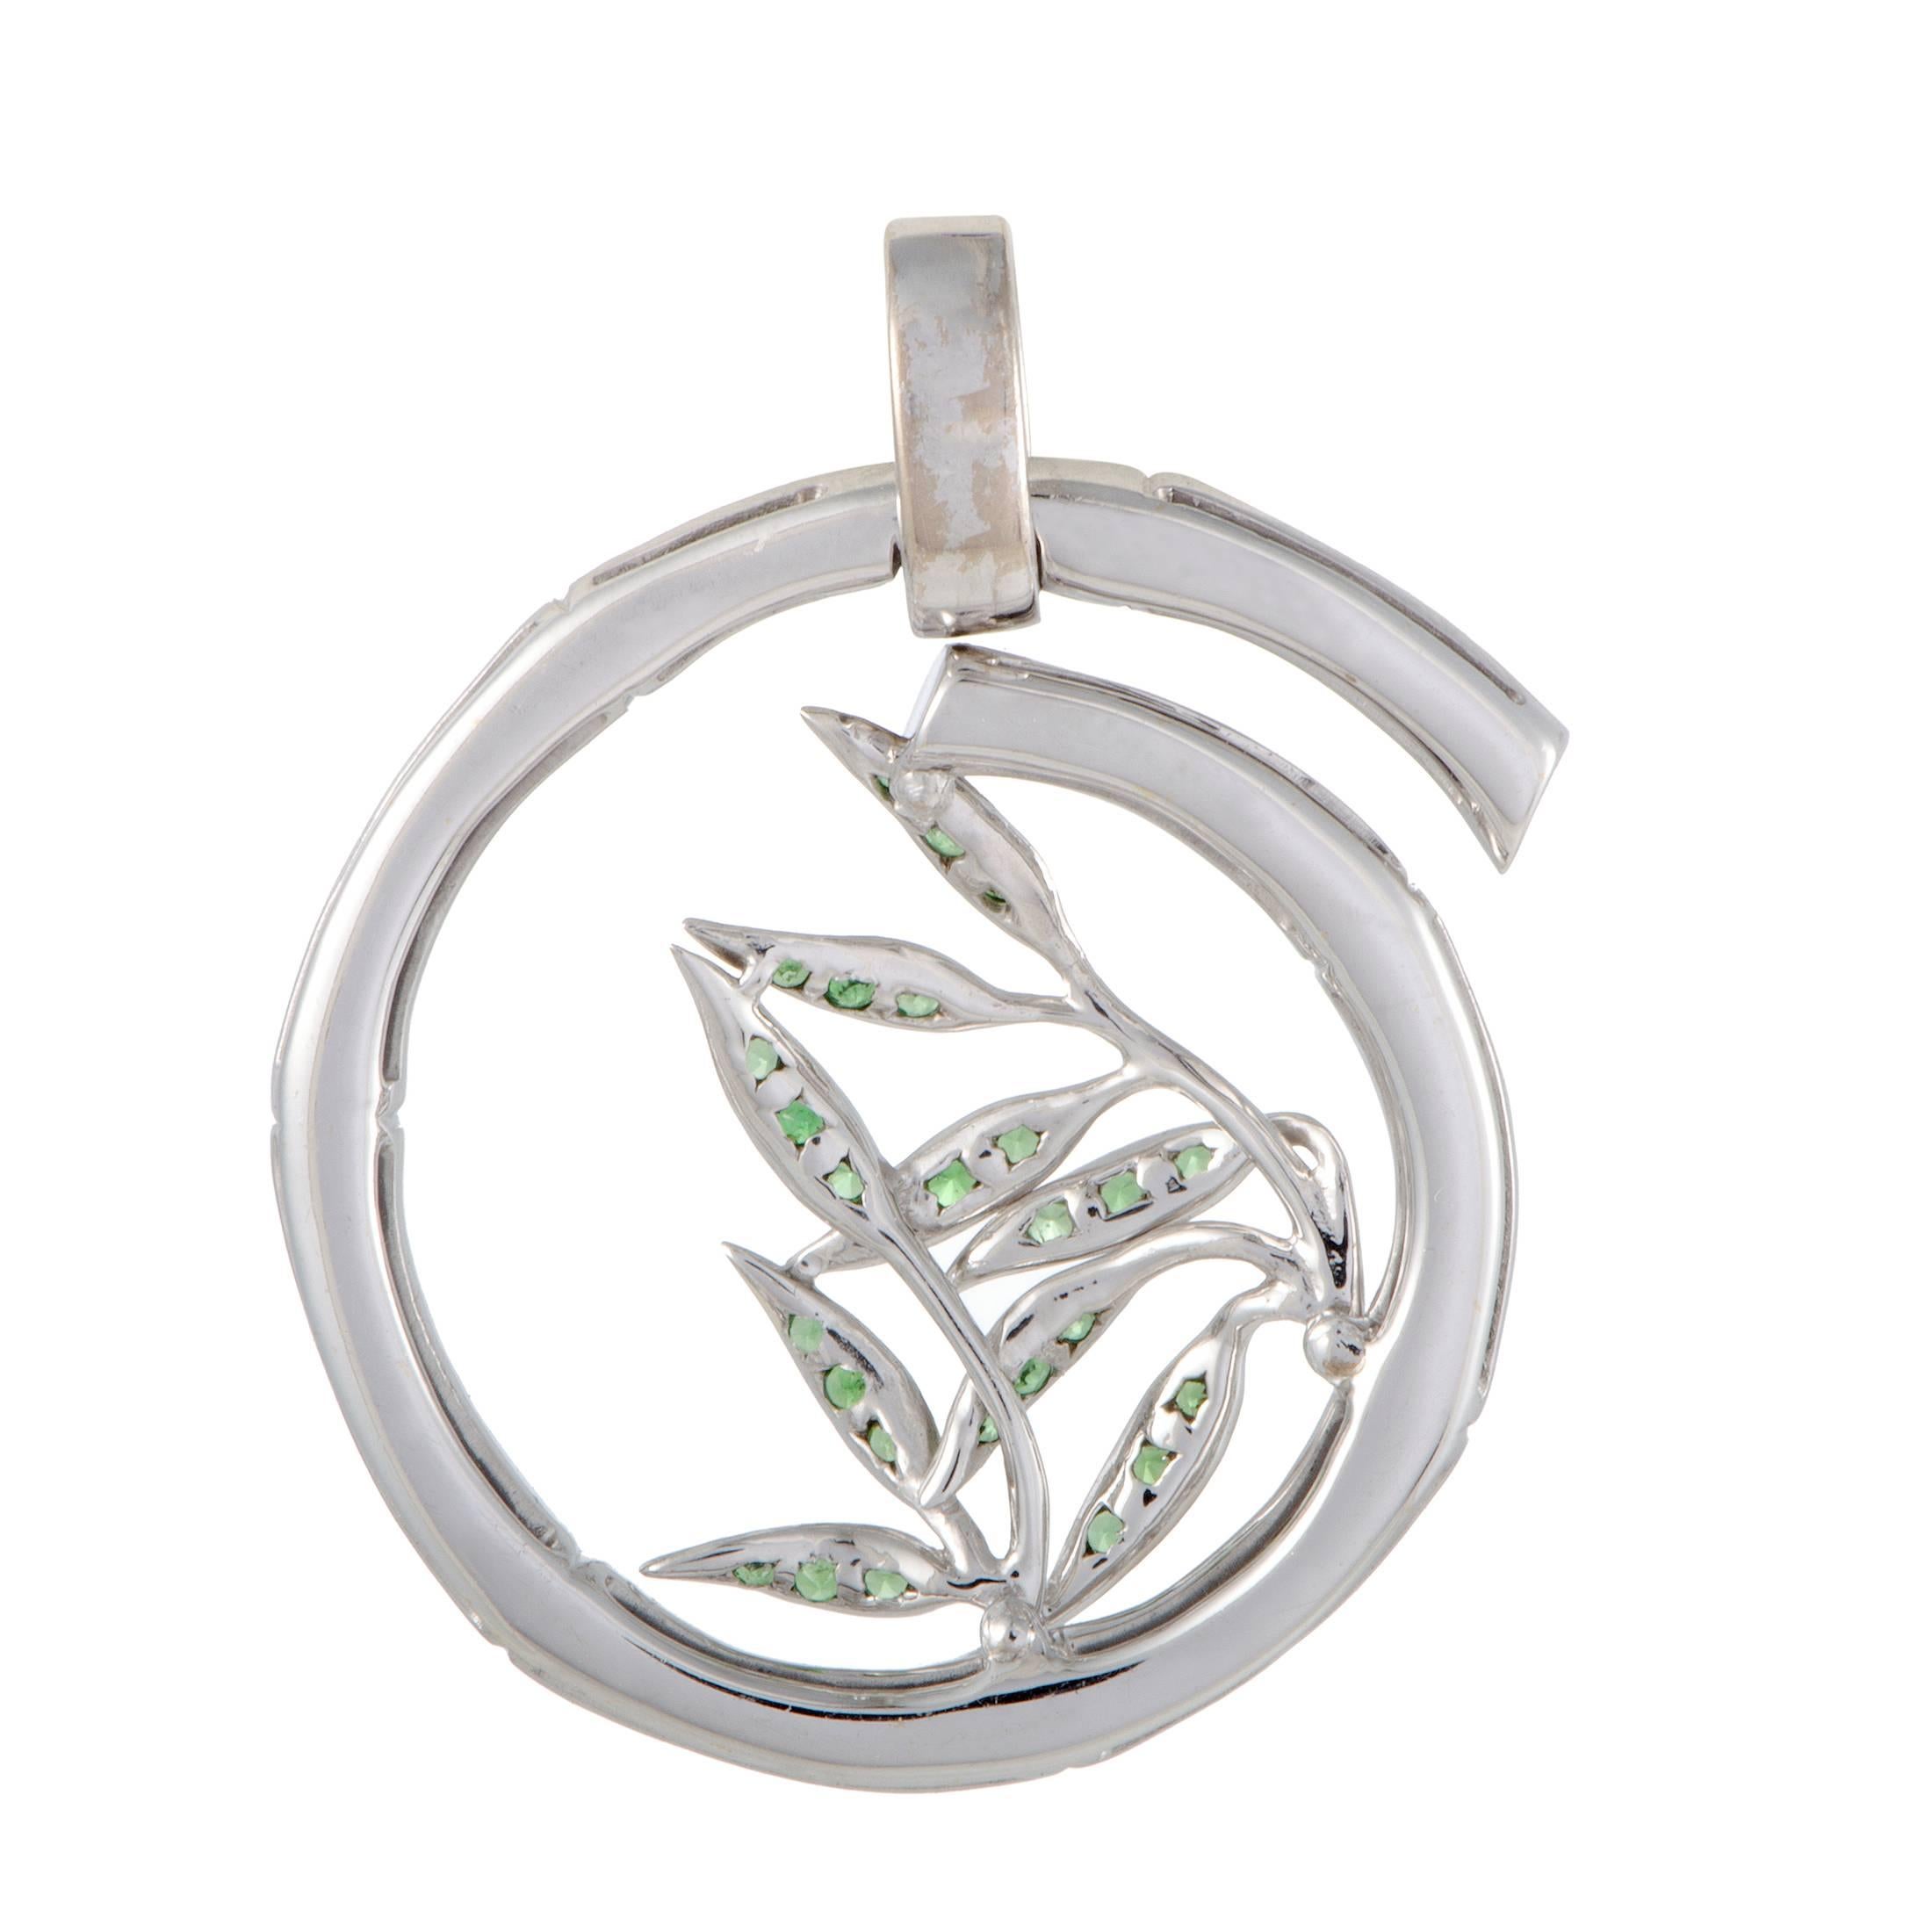 A whimsical pendant characterized by a spiral branch that embodies whimsical 'Peas in a Pod' set in an asymmetrical pattern. Carrera y Carrera crafted this exotic 11.6g pendant from 18K white gold. The spiral setting of the pendant is encrusted with